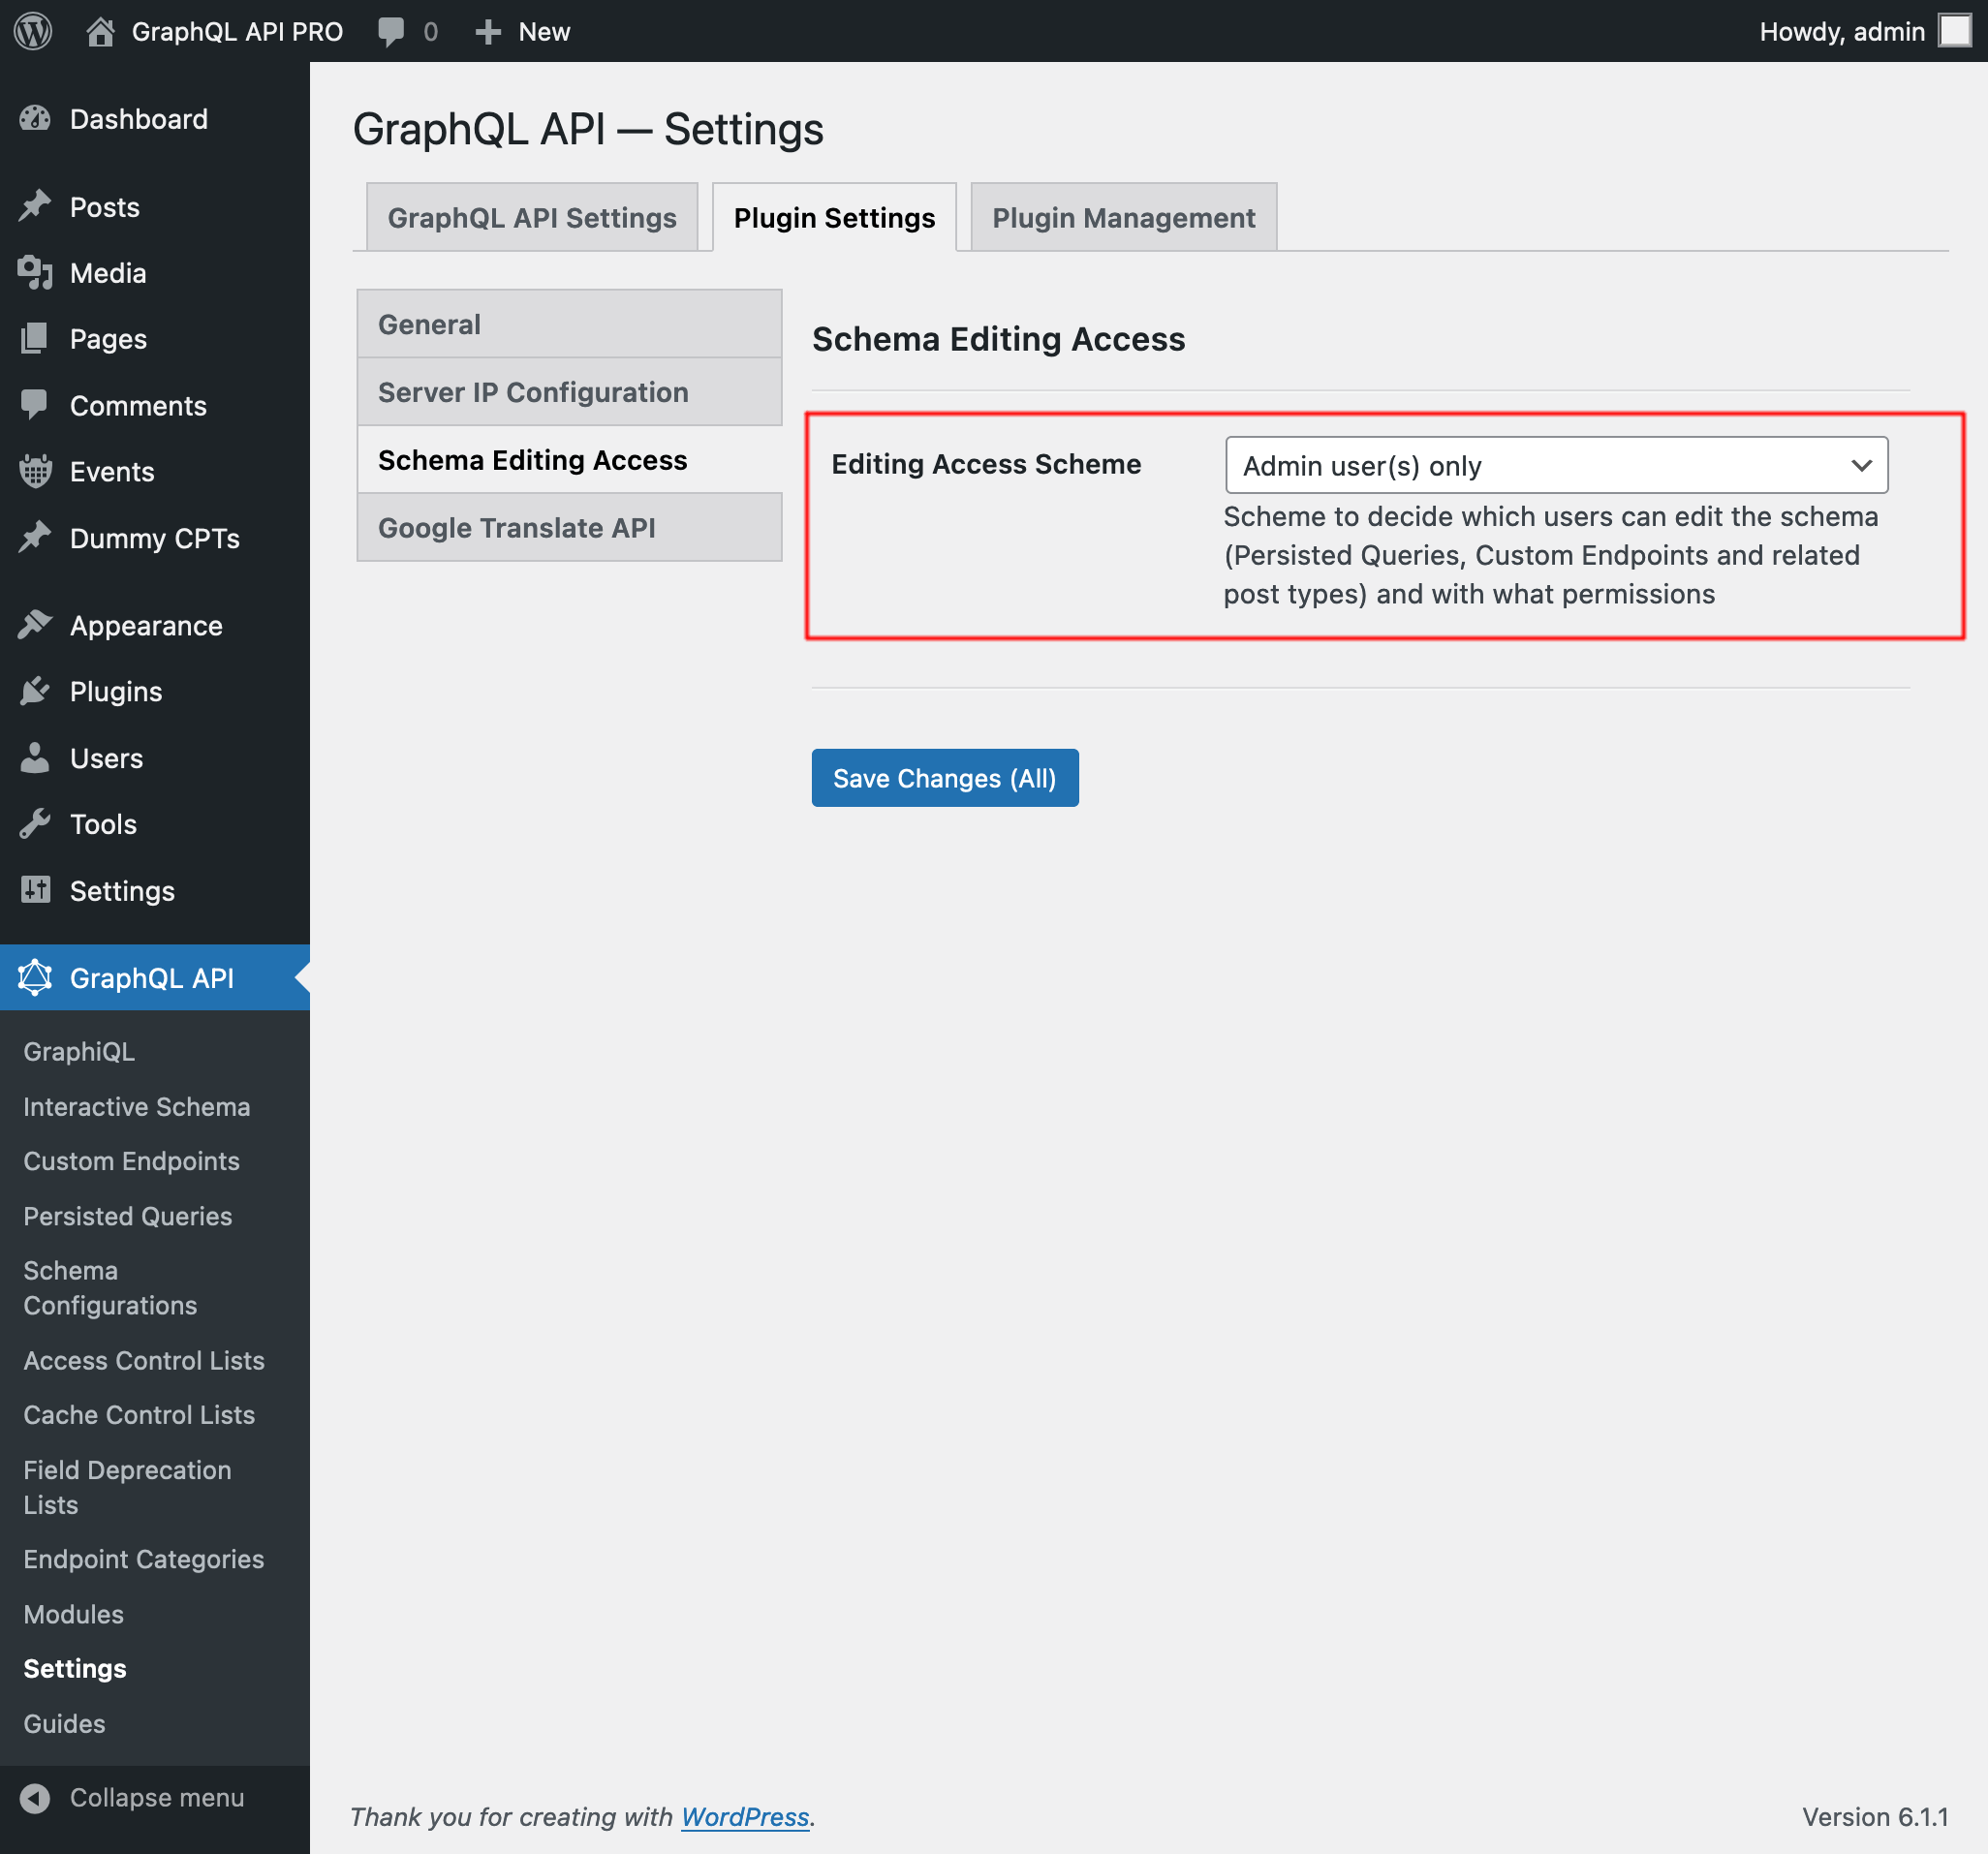 Configuring the schema editing access in the Settings